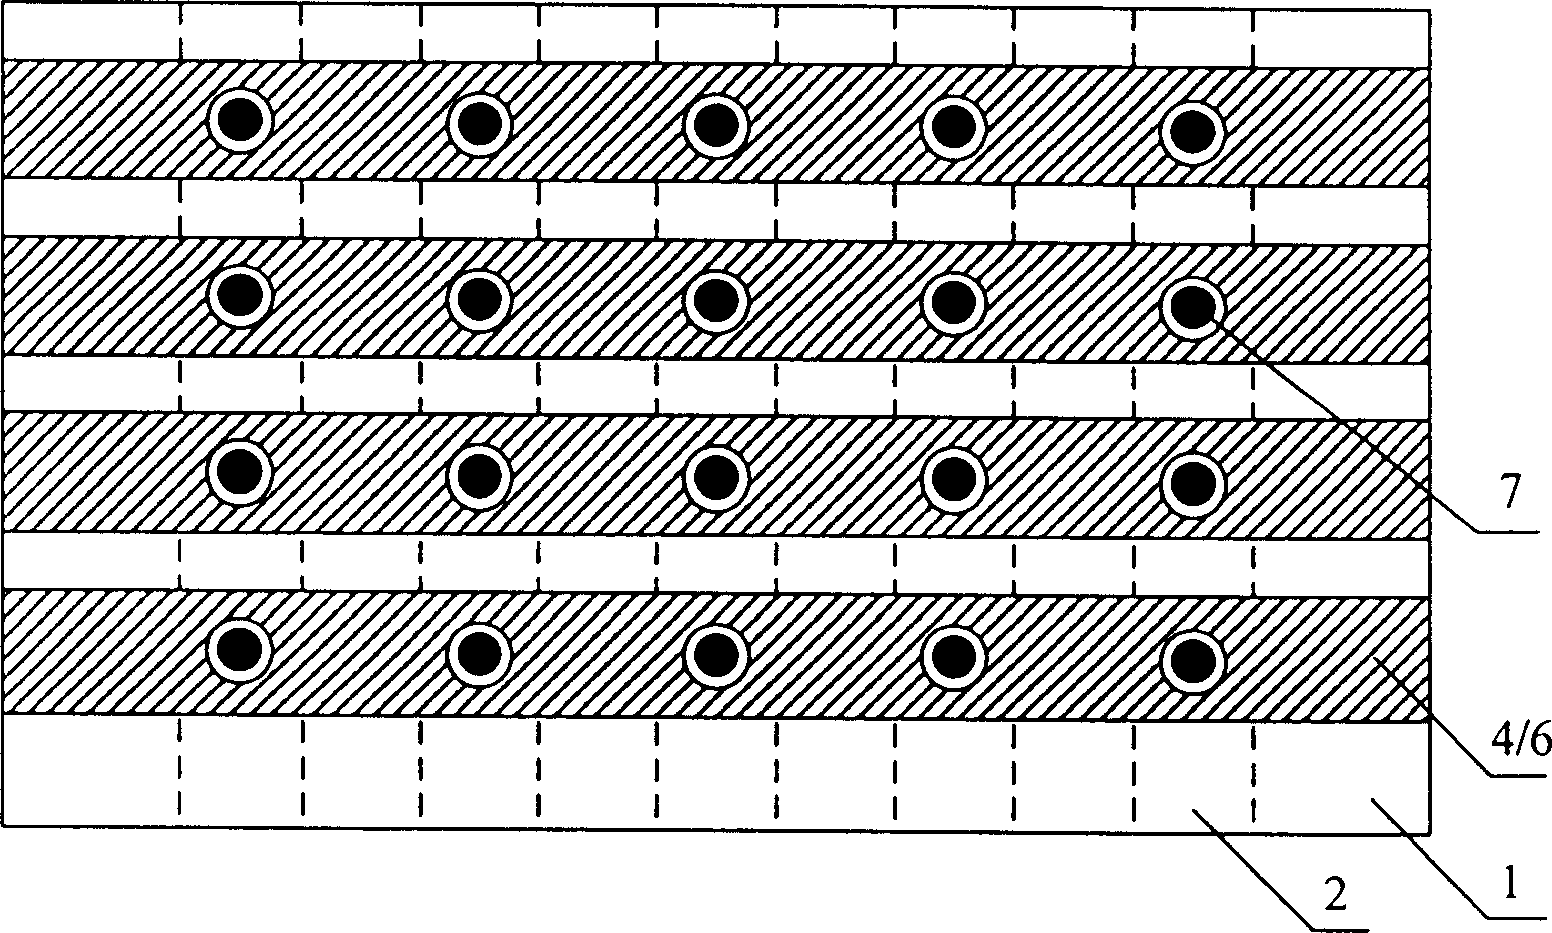 Process for making tripolar carbon nanotube field emission display having self-aligning technique